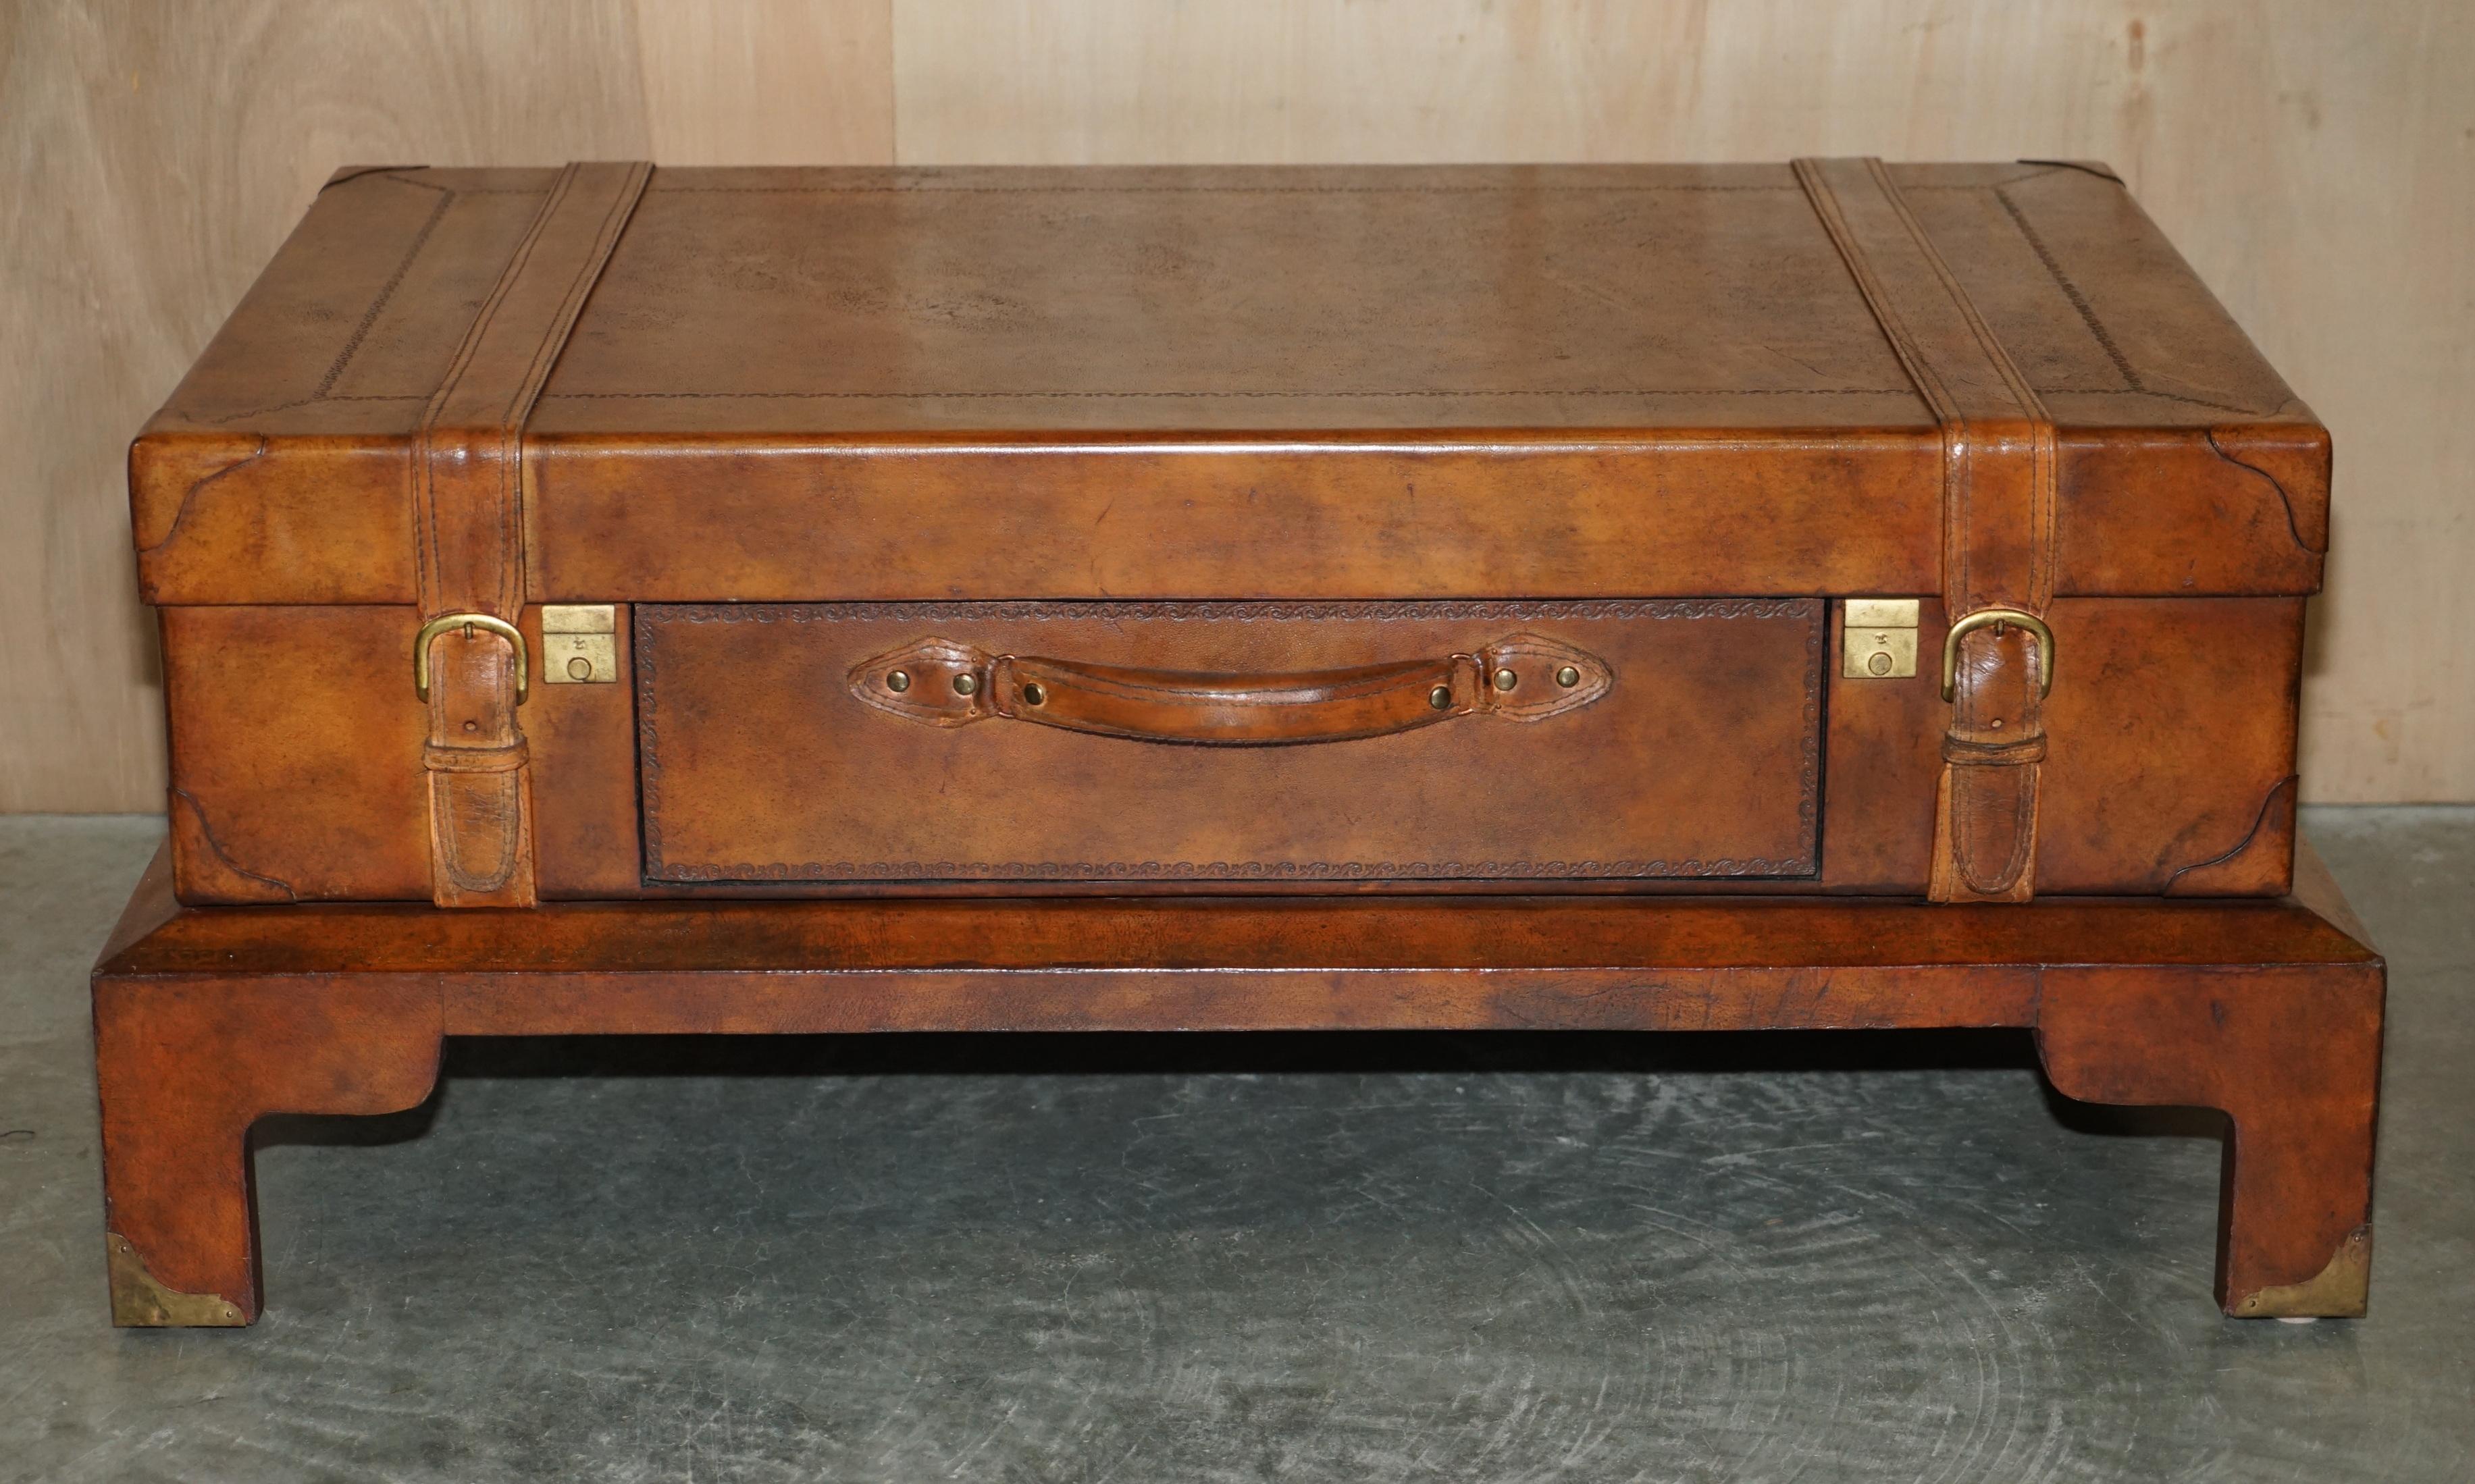 We are delighted to offer for sale this absolutely stunning, hand dyed saddle brown leather trunk / suitcase coffee table with one drawer

A very well made, decorative and unitarian piece, designed to be used as a coffee table, it looks stylish